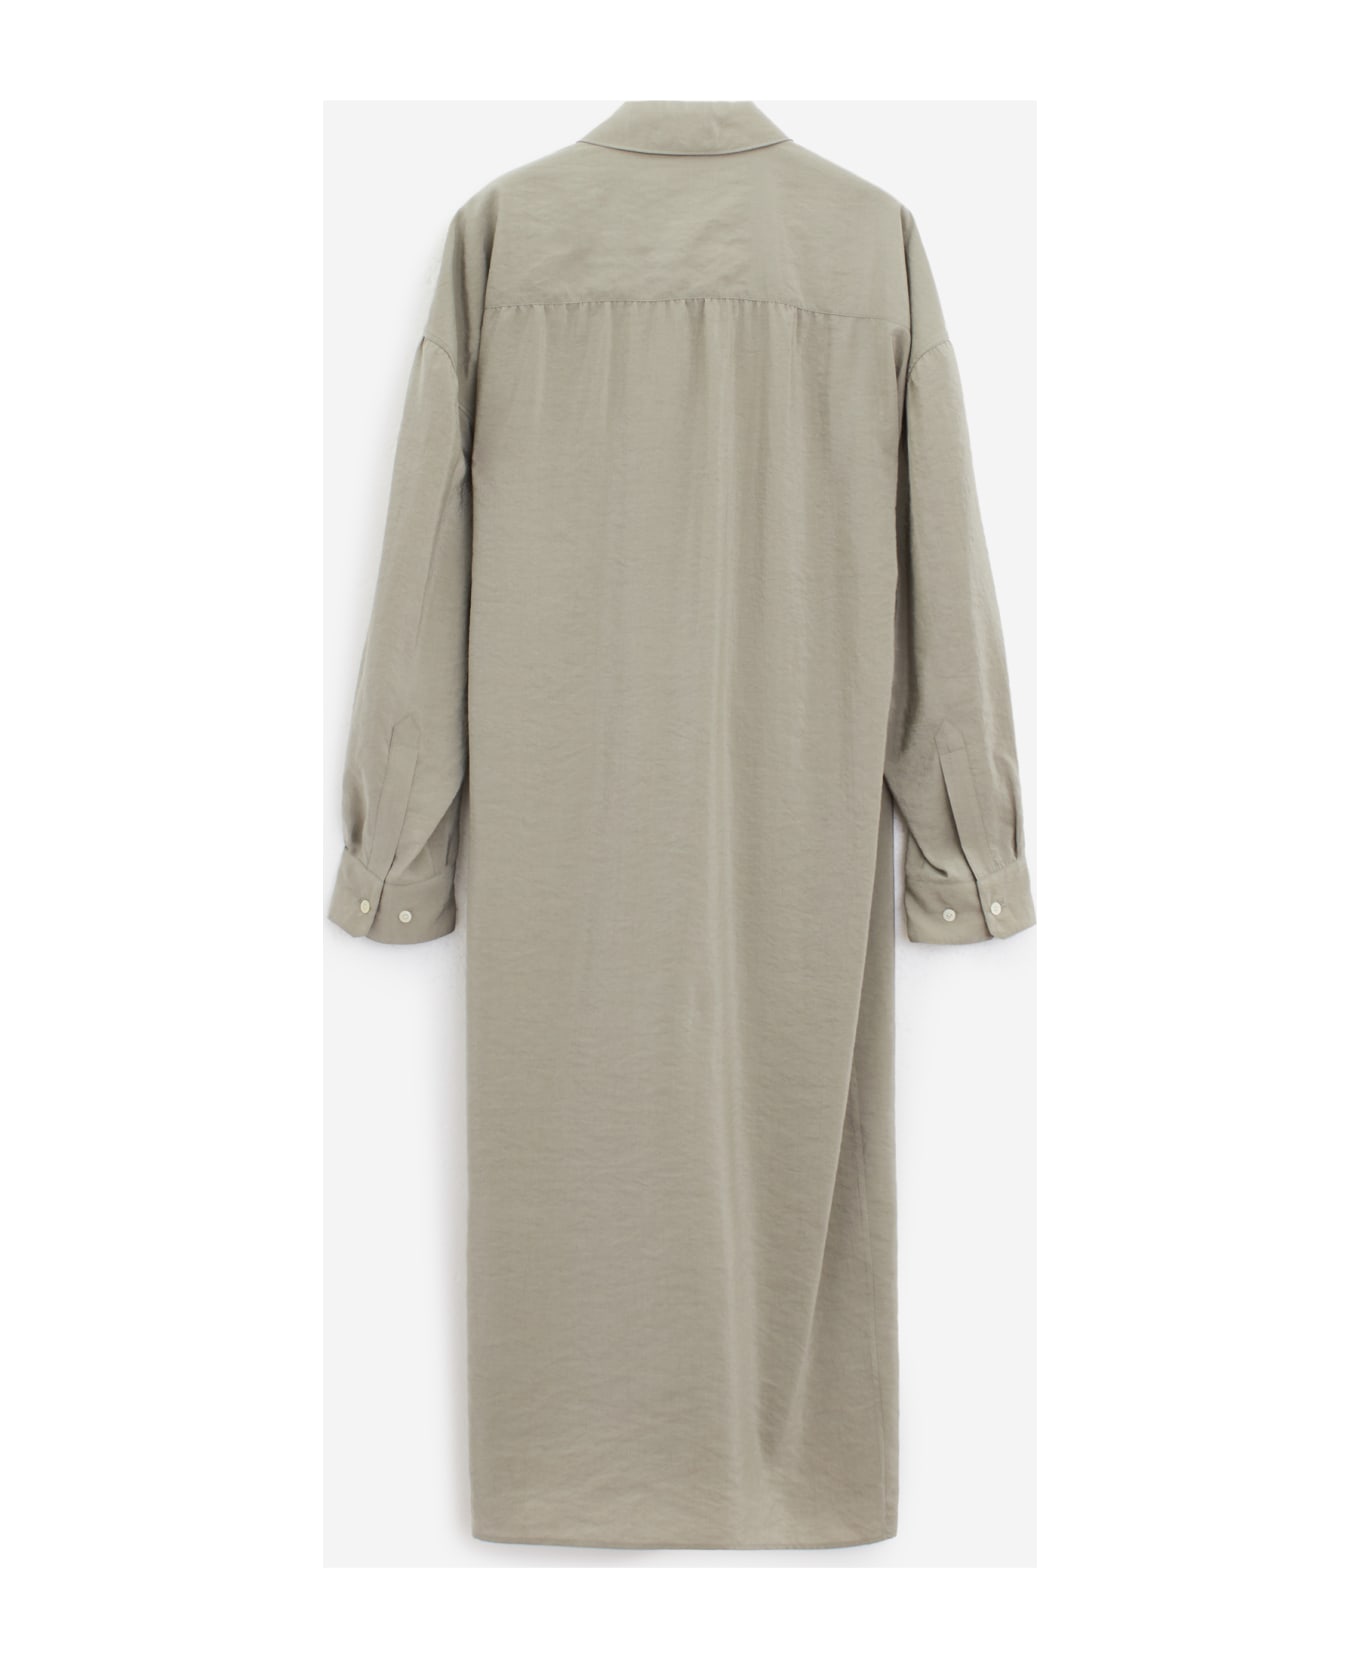 Lemaire Collard Twisted Dress - grey